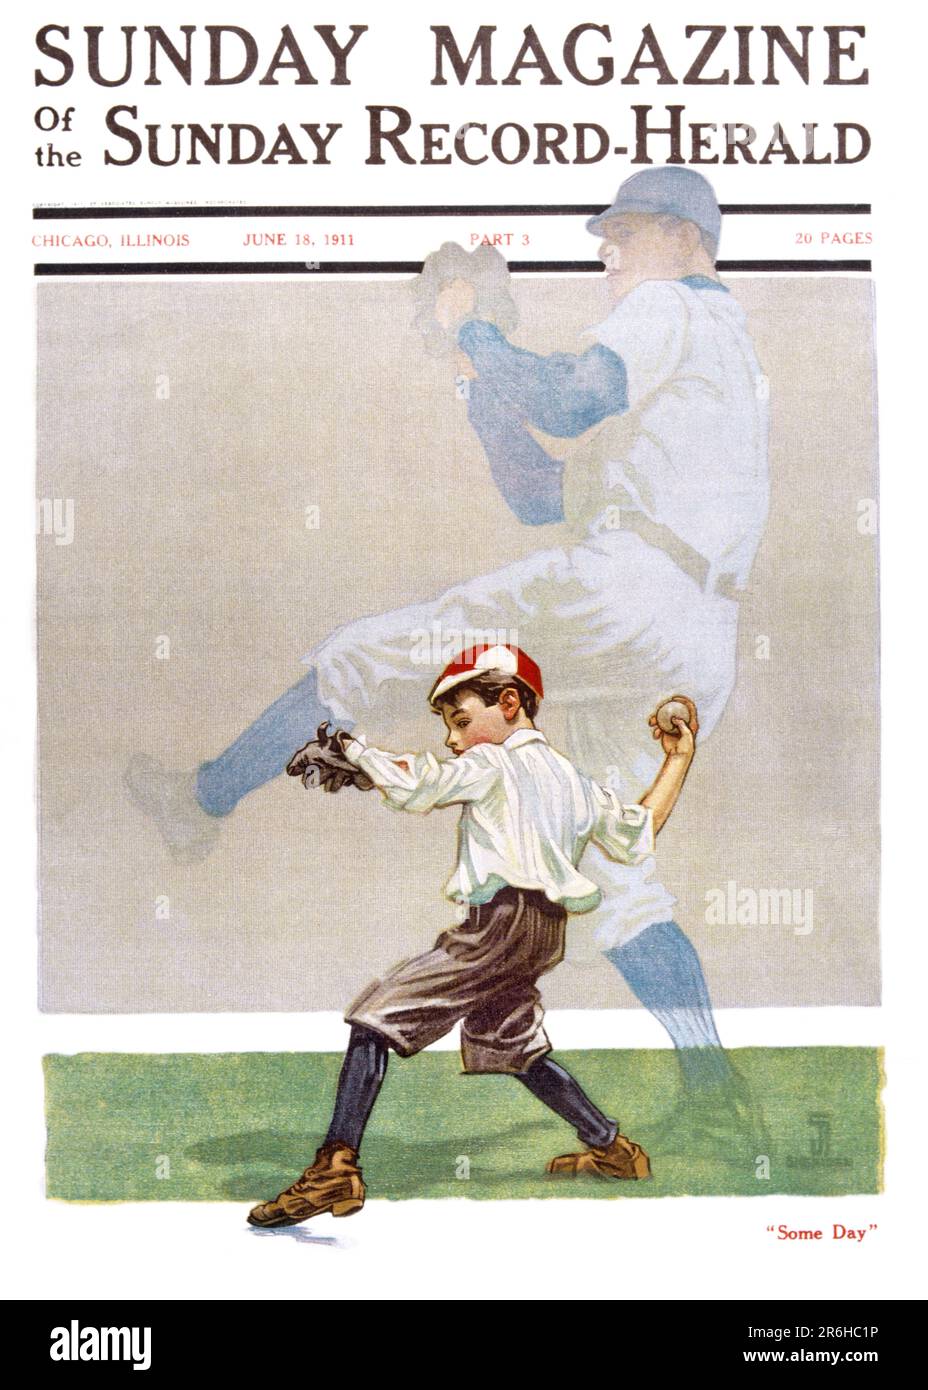 1910s YOUNG BOY PRACTICING PITCHING A BALL AND DREAMING OF A PROFESSIONAL BASEBALL CAREER GHOSTED BEHIND HIM MAGAZINE COVER - kh13600 NAW001 HARS SUNDAY HOME LIFE COPY SPACE FULL-LENGTH PHYSICAL FITNESS INSPIRATION MALES GOALS DREAMS ADVENTURE STRENGTH AND DREAMING EXCITEMENT RECREATION SUNDAY MAGAZINE 1911 OCCUPATIONS PROFESSIONAL SPORTS CONCEPTUAL IMAGINATION GHOSTED BALL GAME BALL SPORT GROWTH HERALD HIM JUVENILES PITCHING PRE-TEEN PRE-TEEN BOY PRECISION BASEBALL BAT CAUCASIAN ETHNICITY OLD FASHIONED PRACTICING Stock Photo